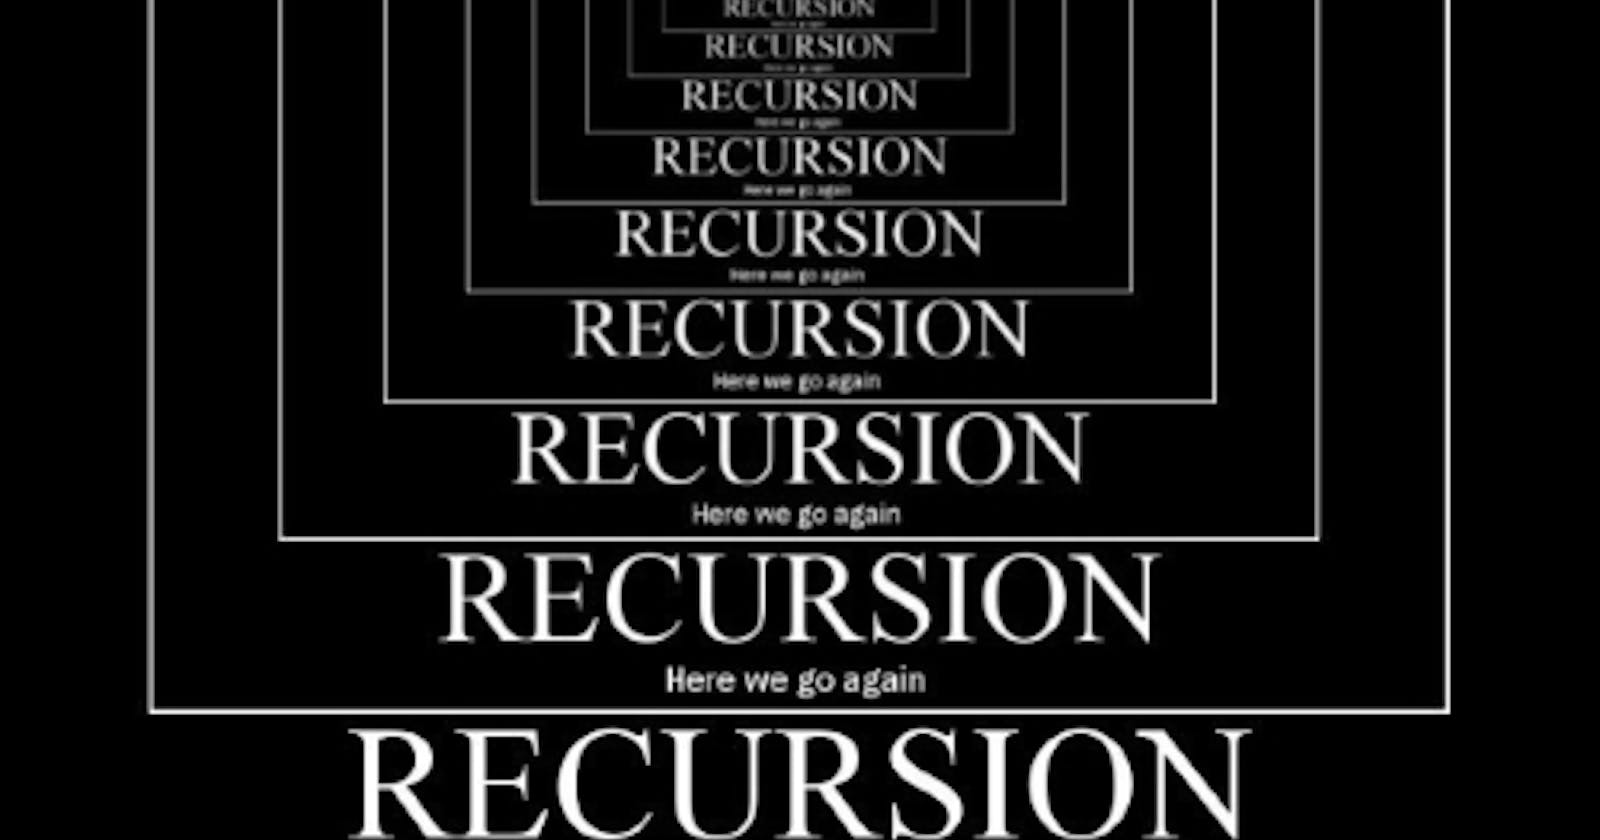 "Tail Recursion" -  The most unexplored topic.